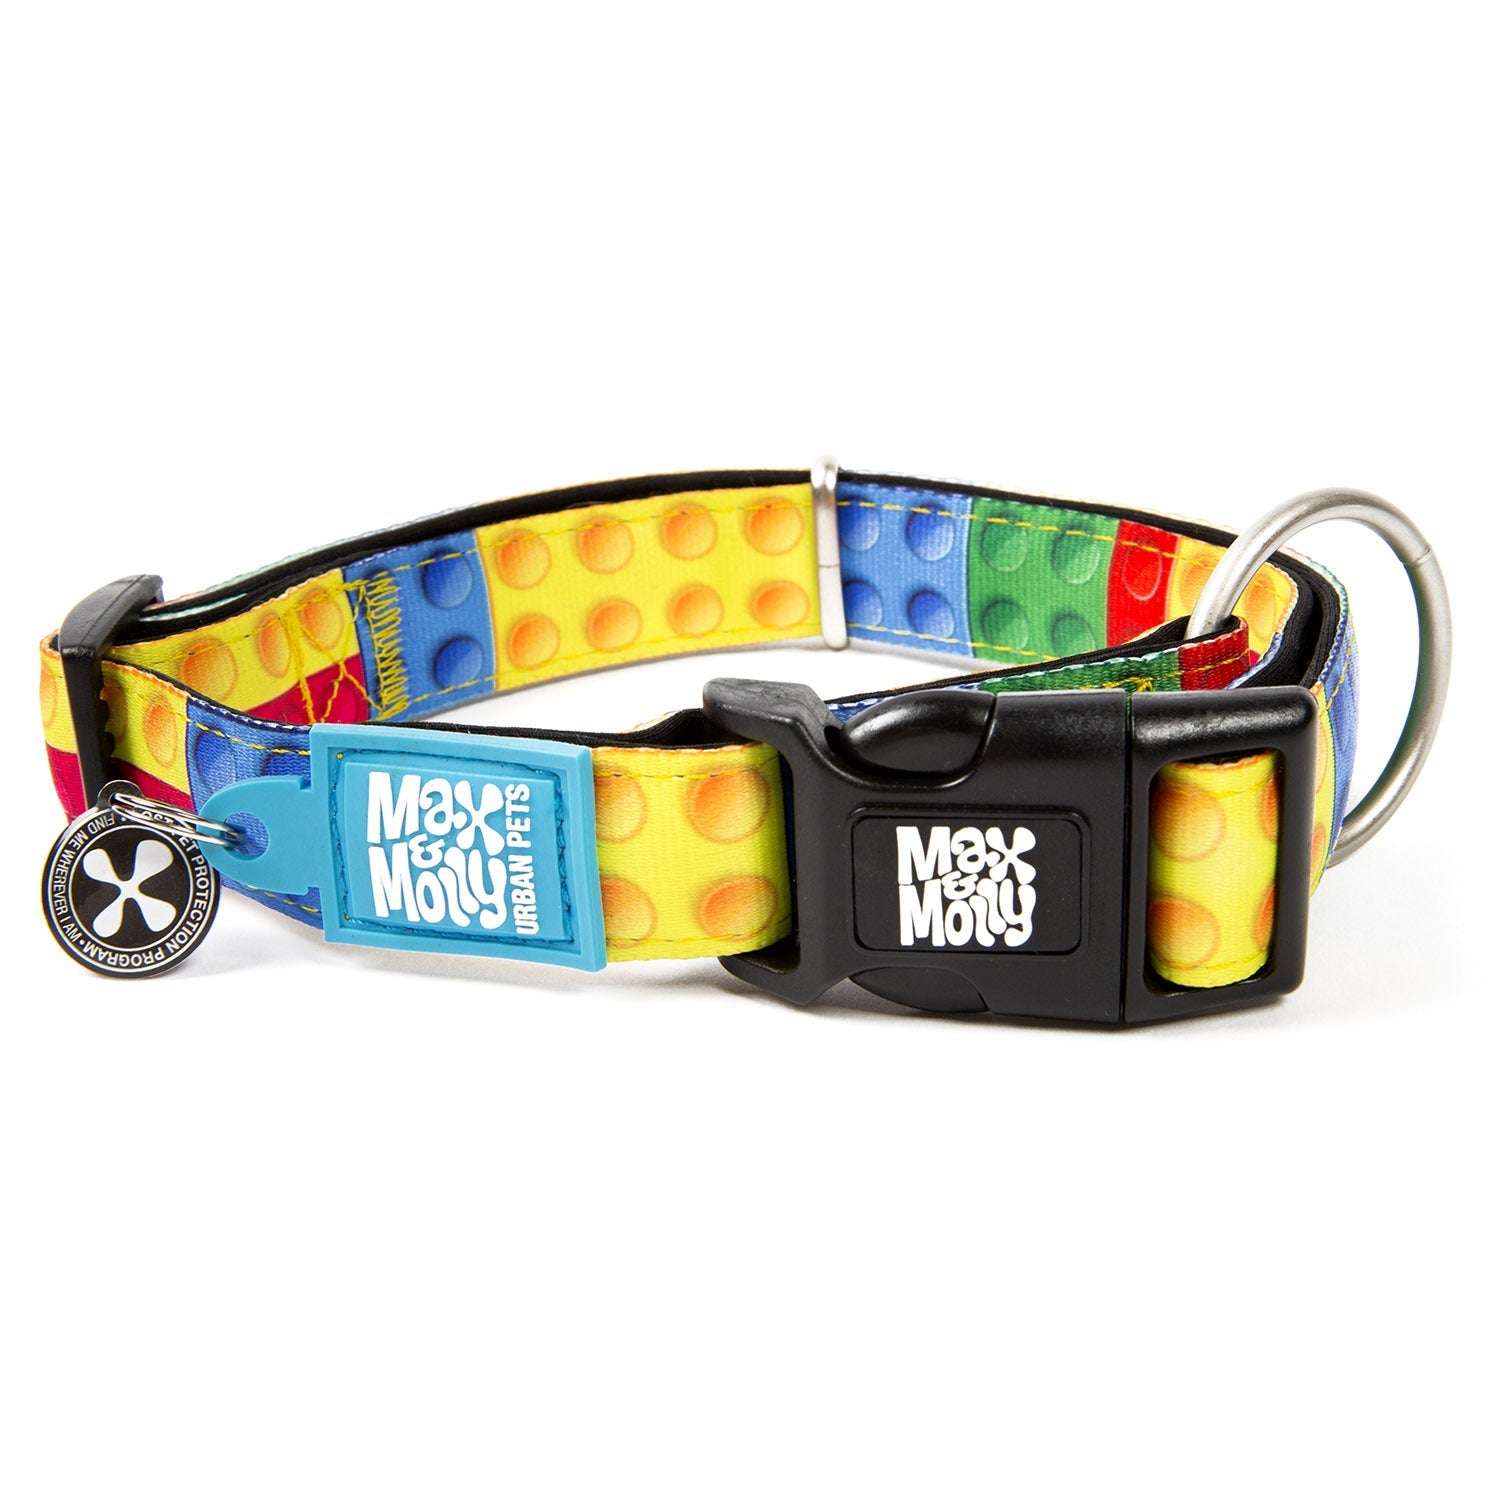 Max & Molly Smart ID Dog Collar - Playtime 2.0 - Pets and More